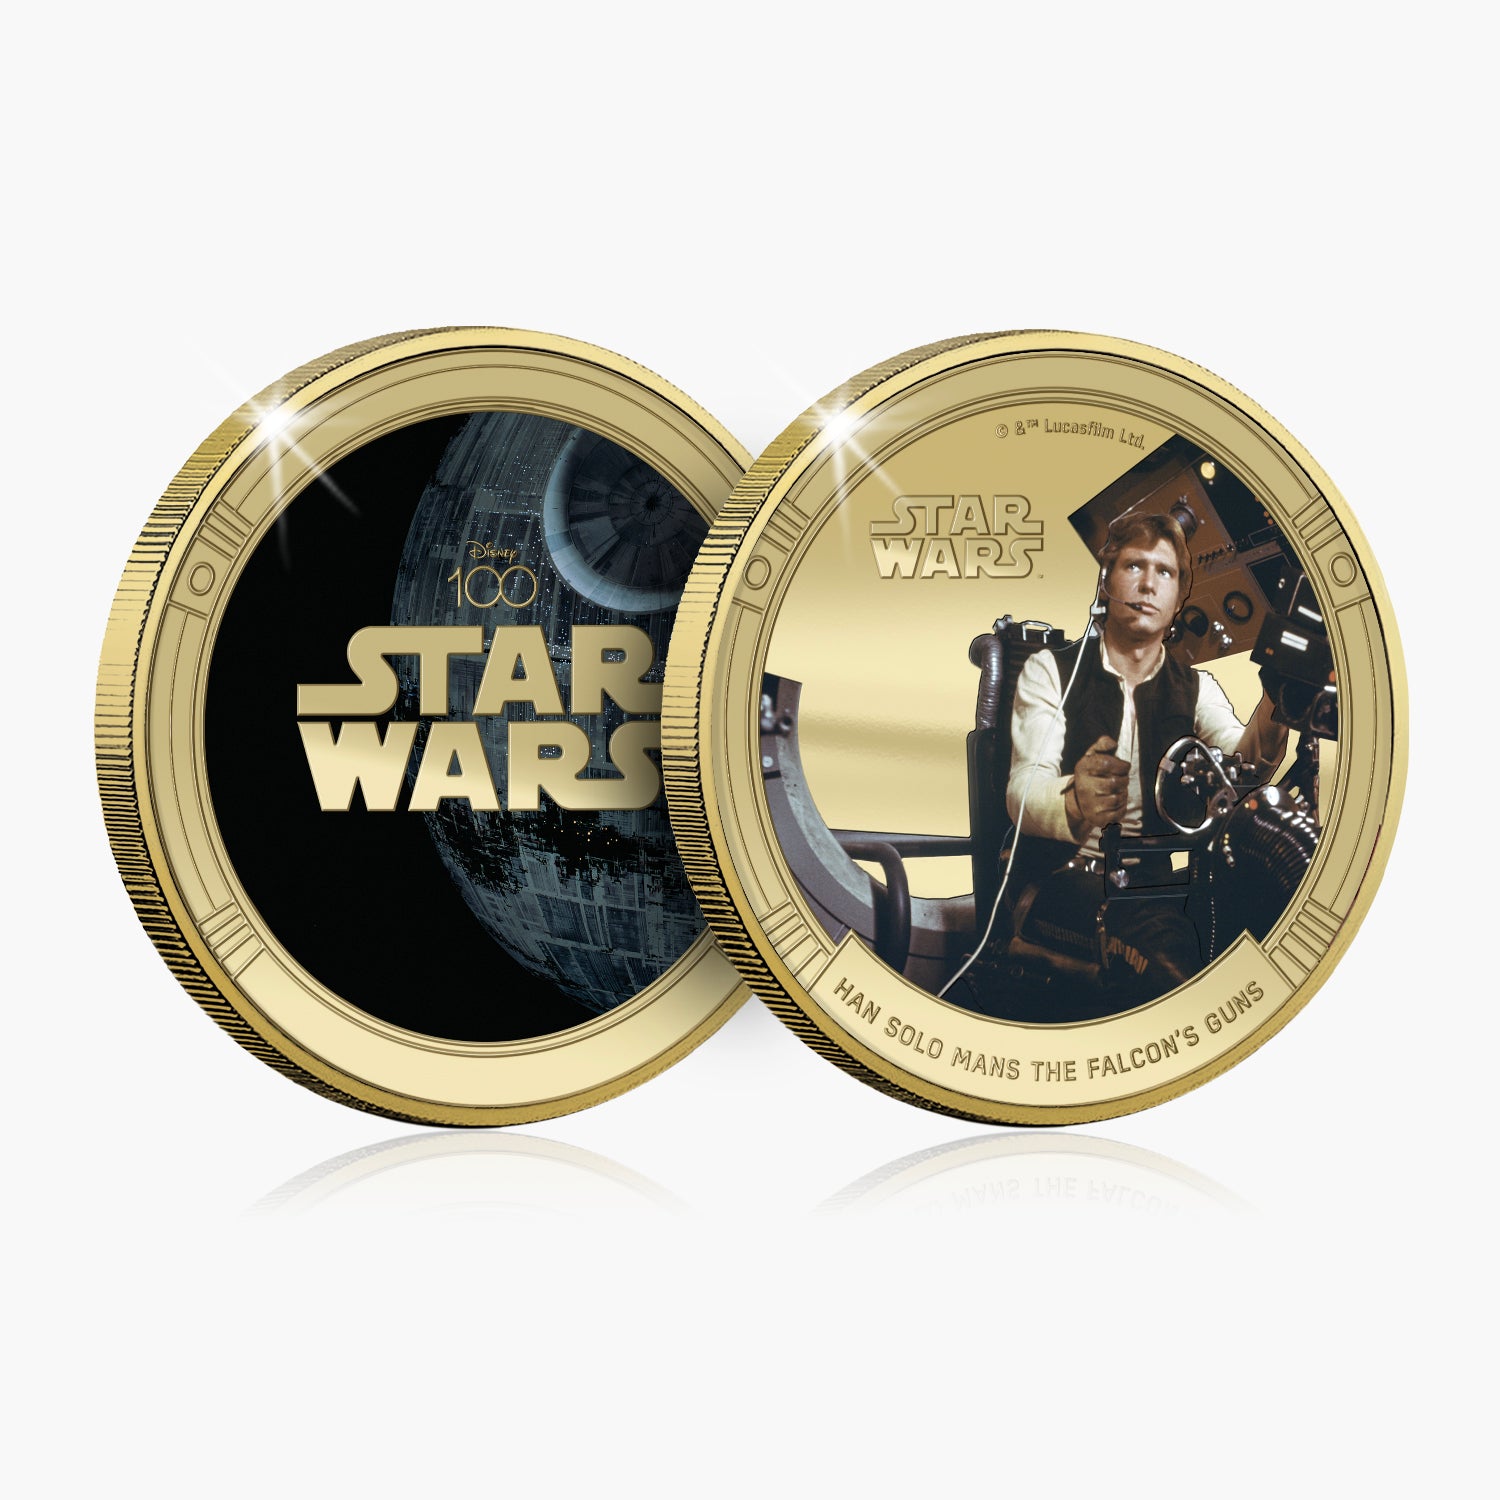 D100 Star Wars Han Solo Mans The Falcon's Guns Gold Plated Commemorative